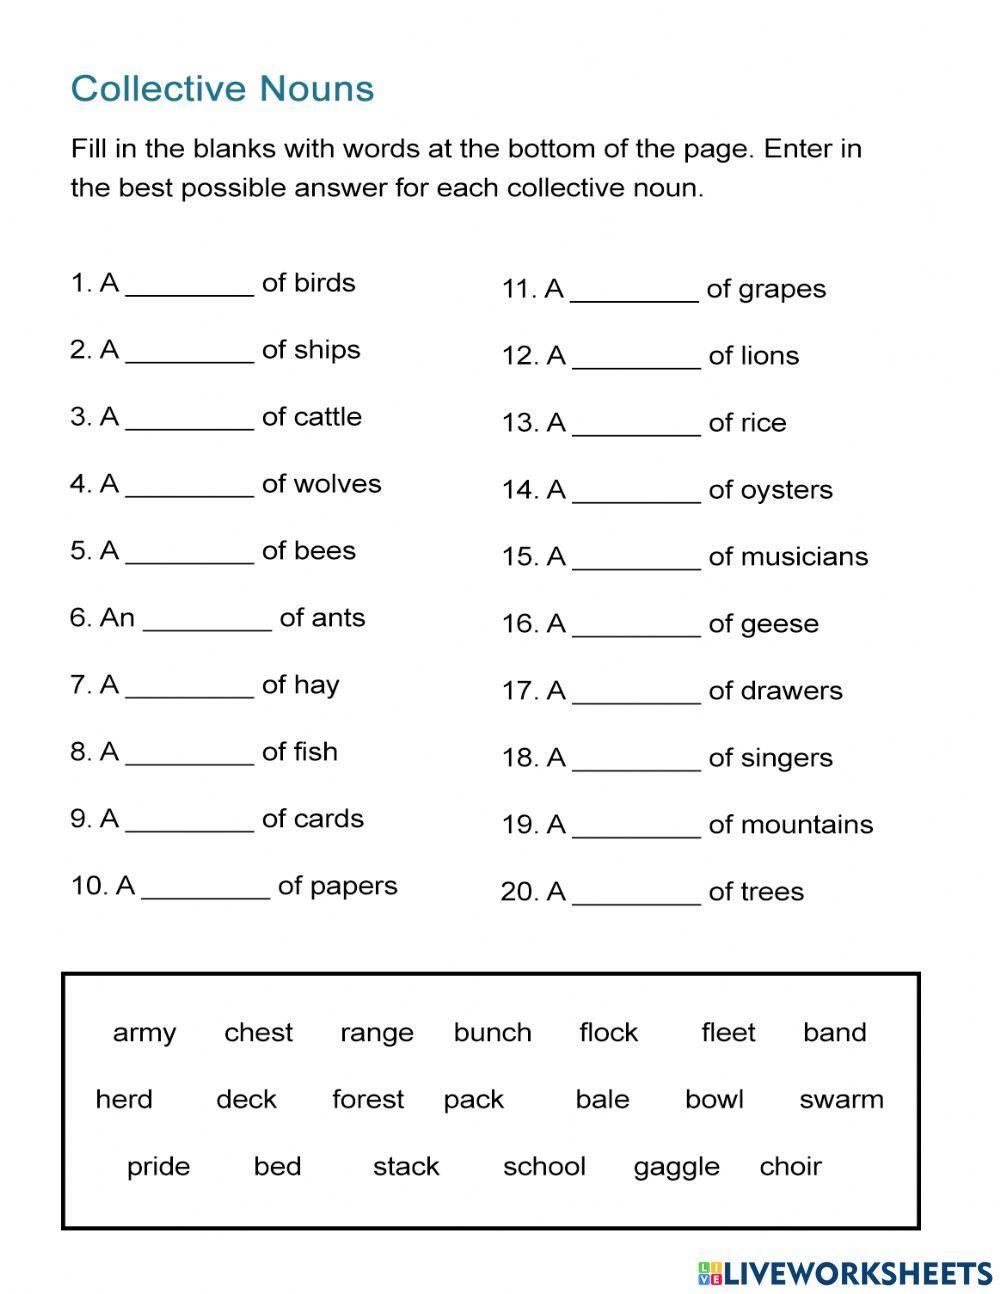 collective-nouns-class-iv-worksheet-live-worksheets